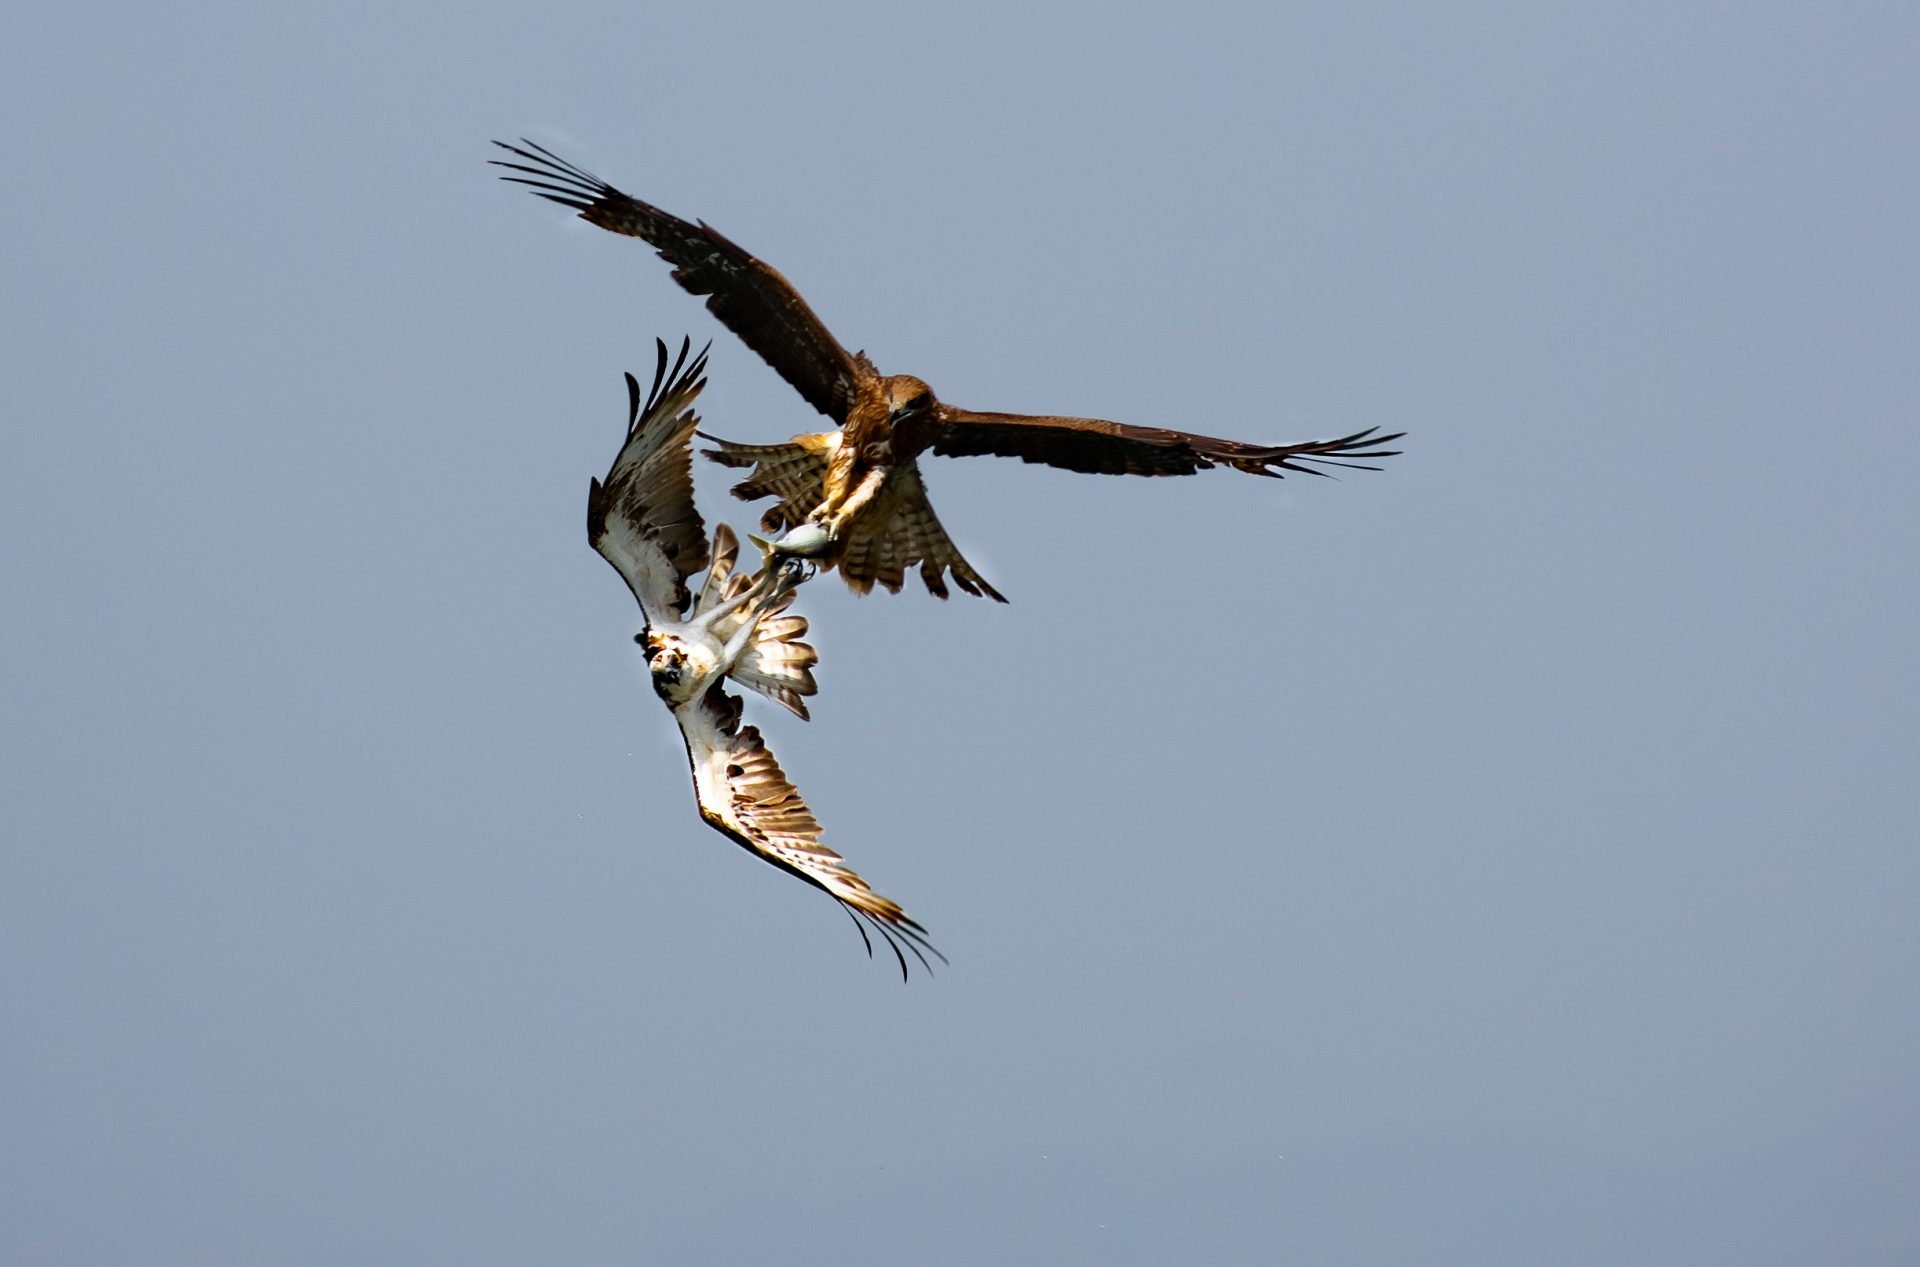 two birds fighting in the air over the fish